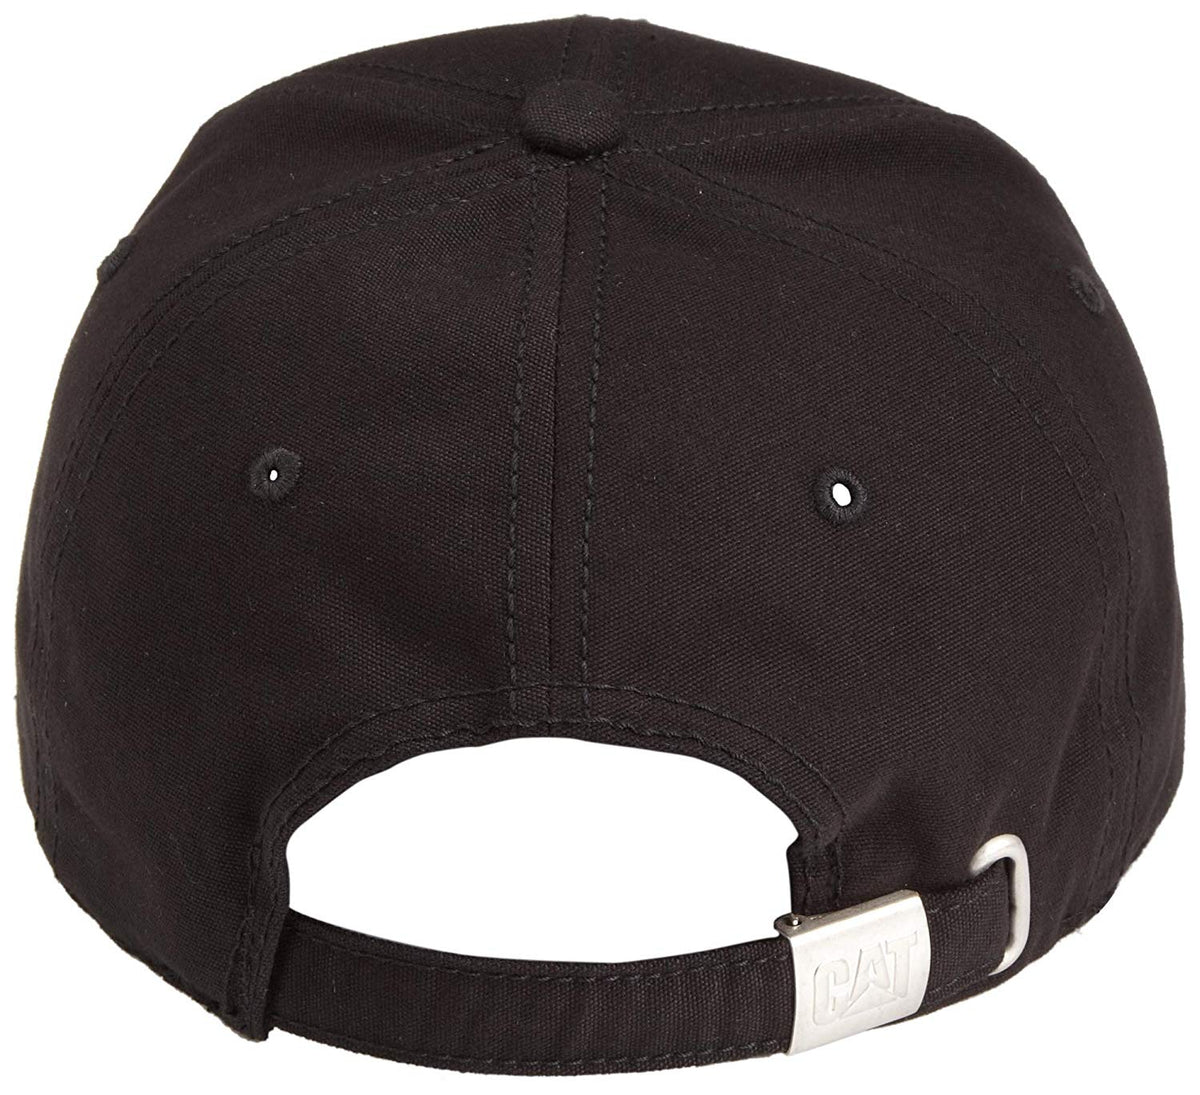 CAT W01791-016 Trademark Cap with Embroidered Front Logo, Black, One Size